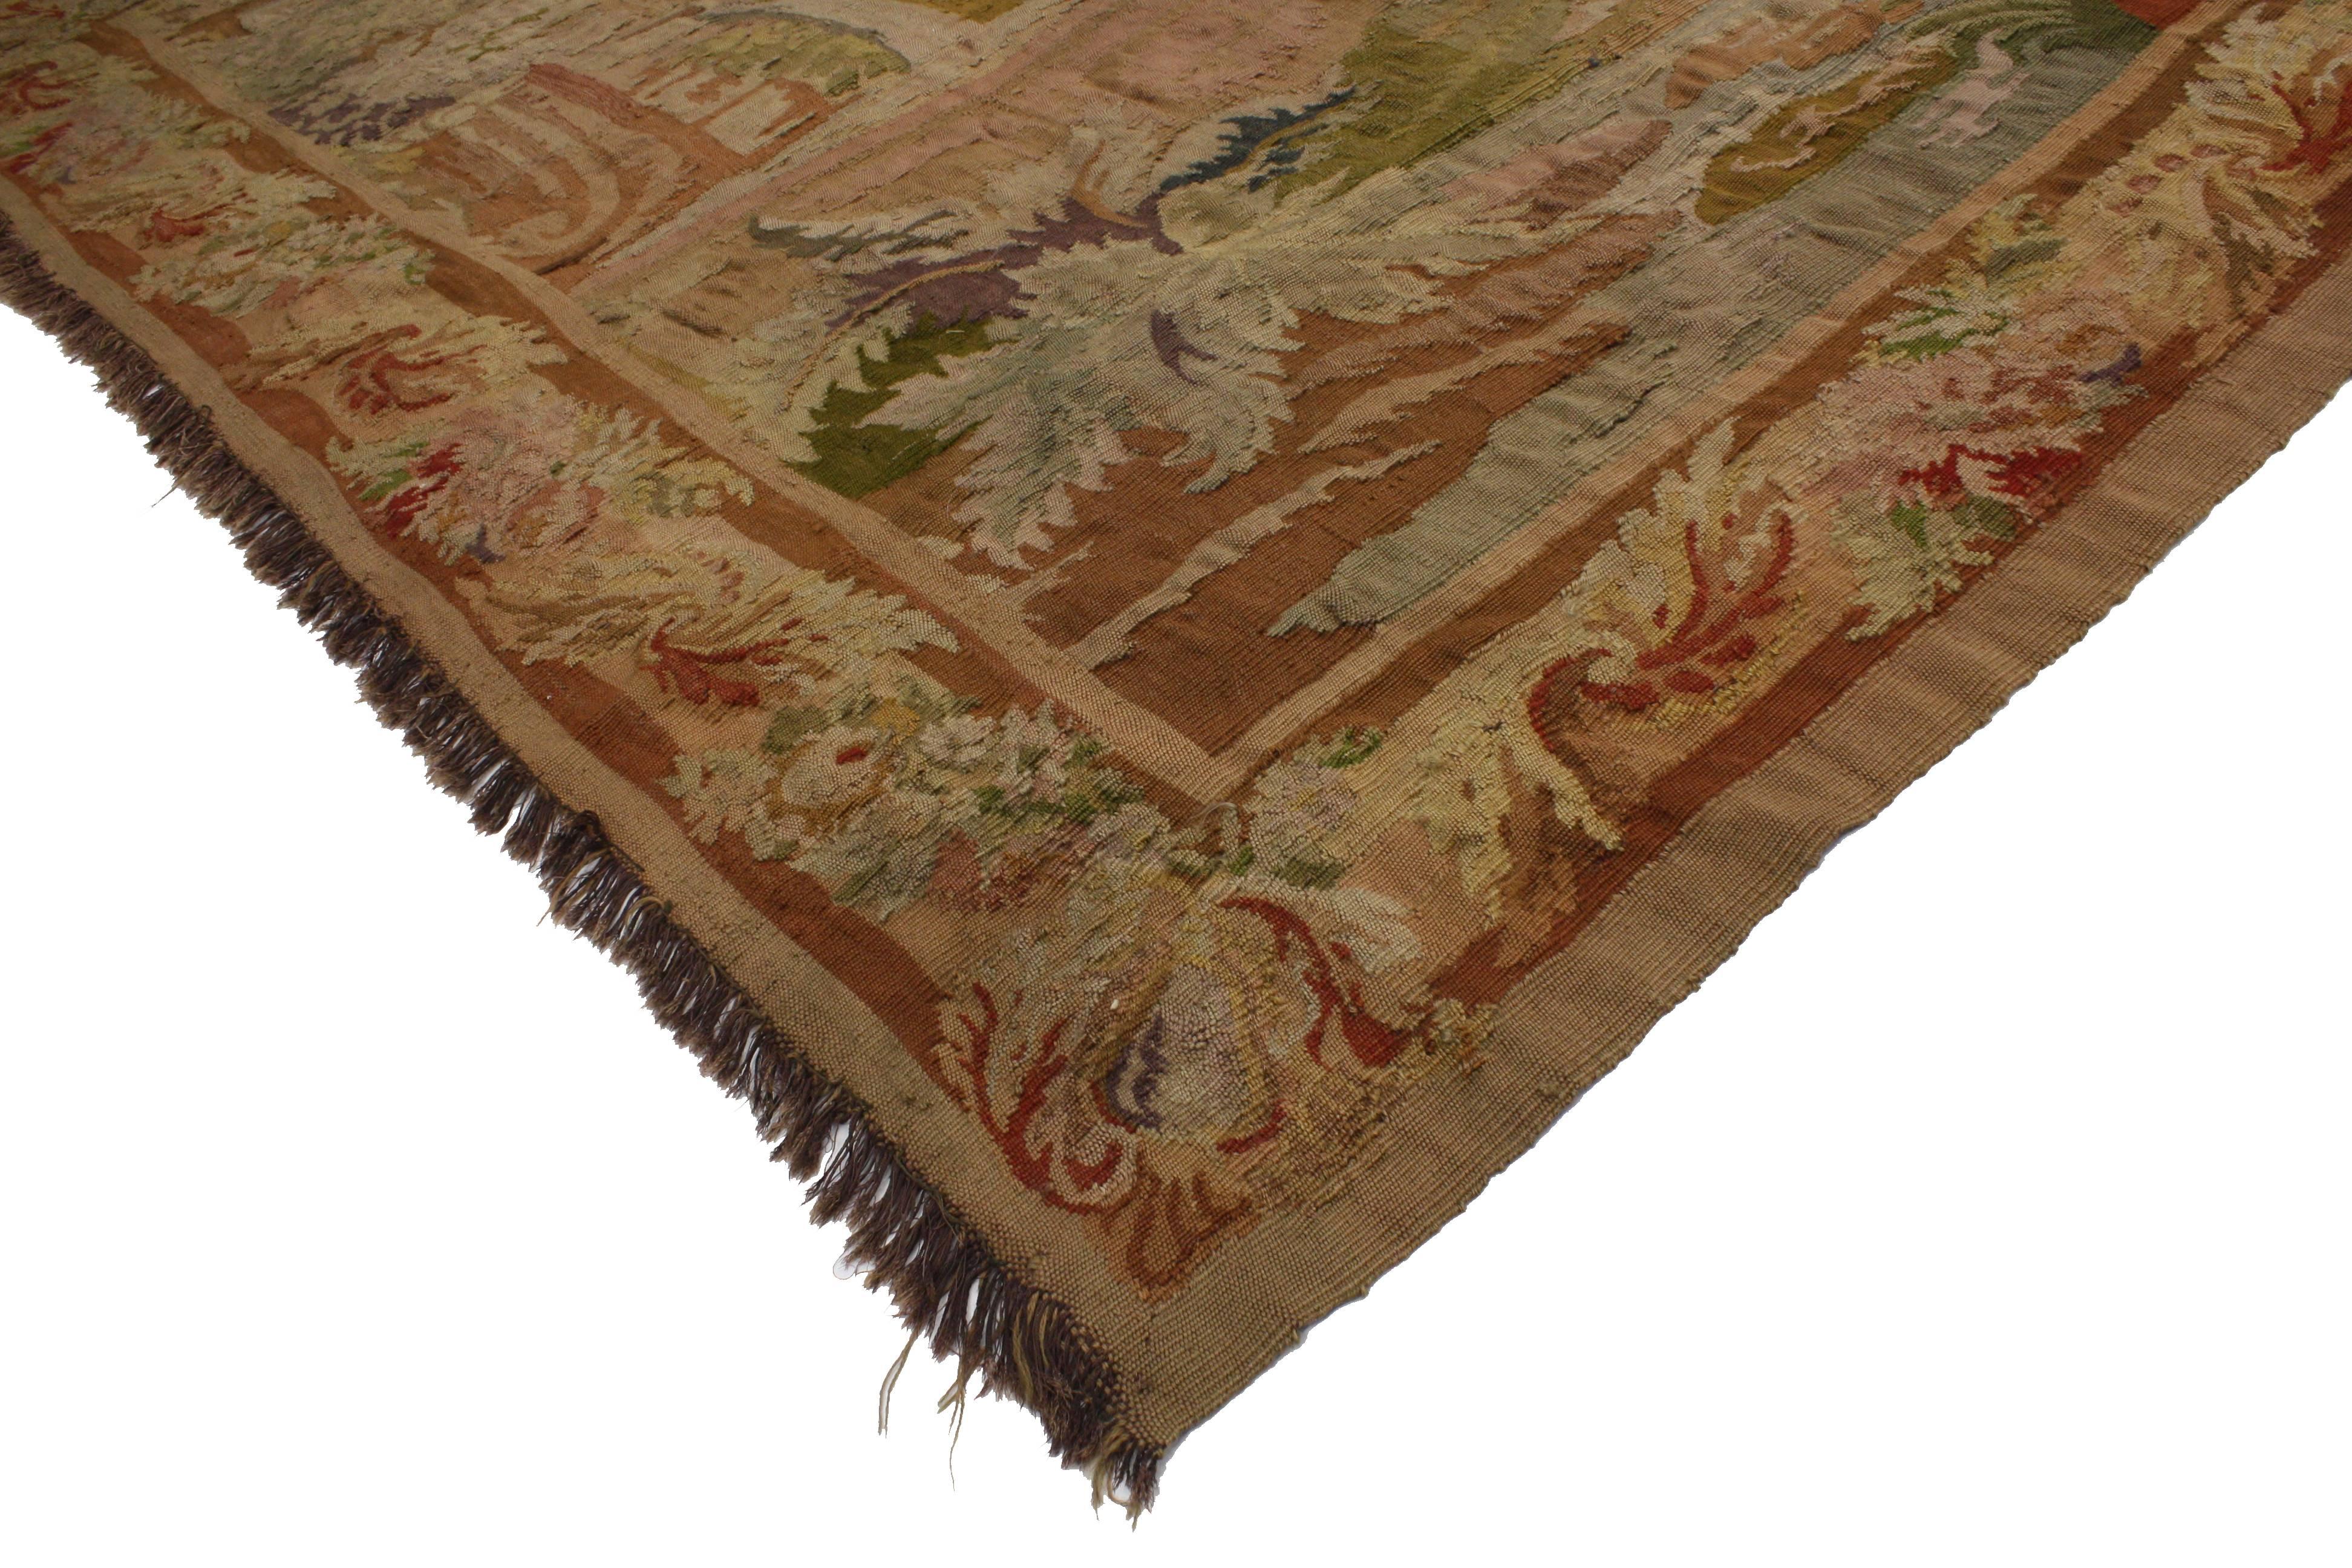 The subject of this tapestry should be the serenity and simplicity of country life. In this traditional French landscape setting, we see two lovers enjoying a picnic in the middle of a lovely countryside setting. On a small landing near the water’s